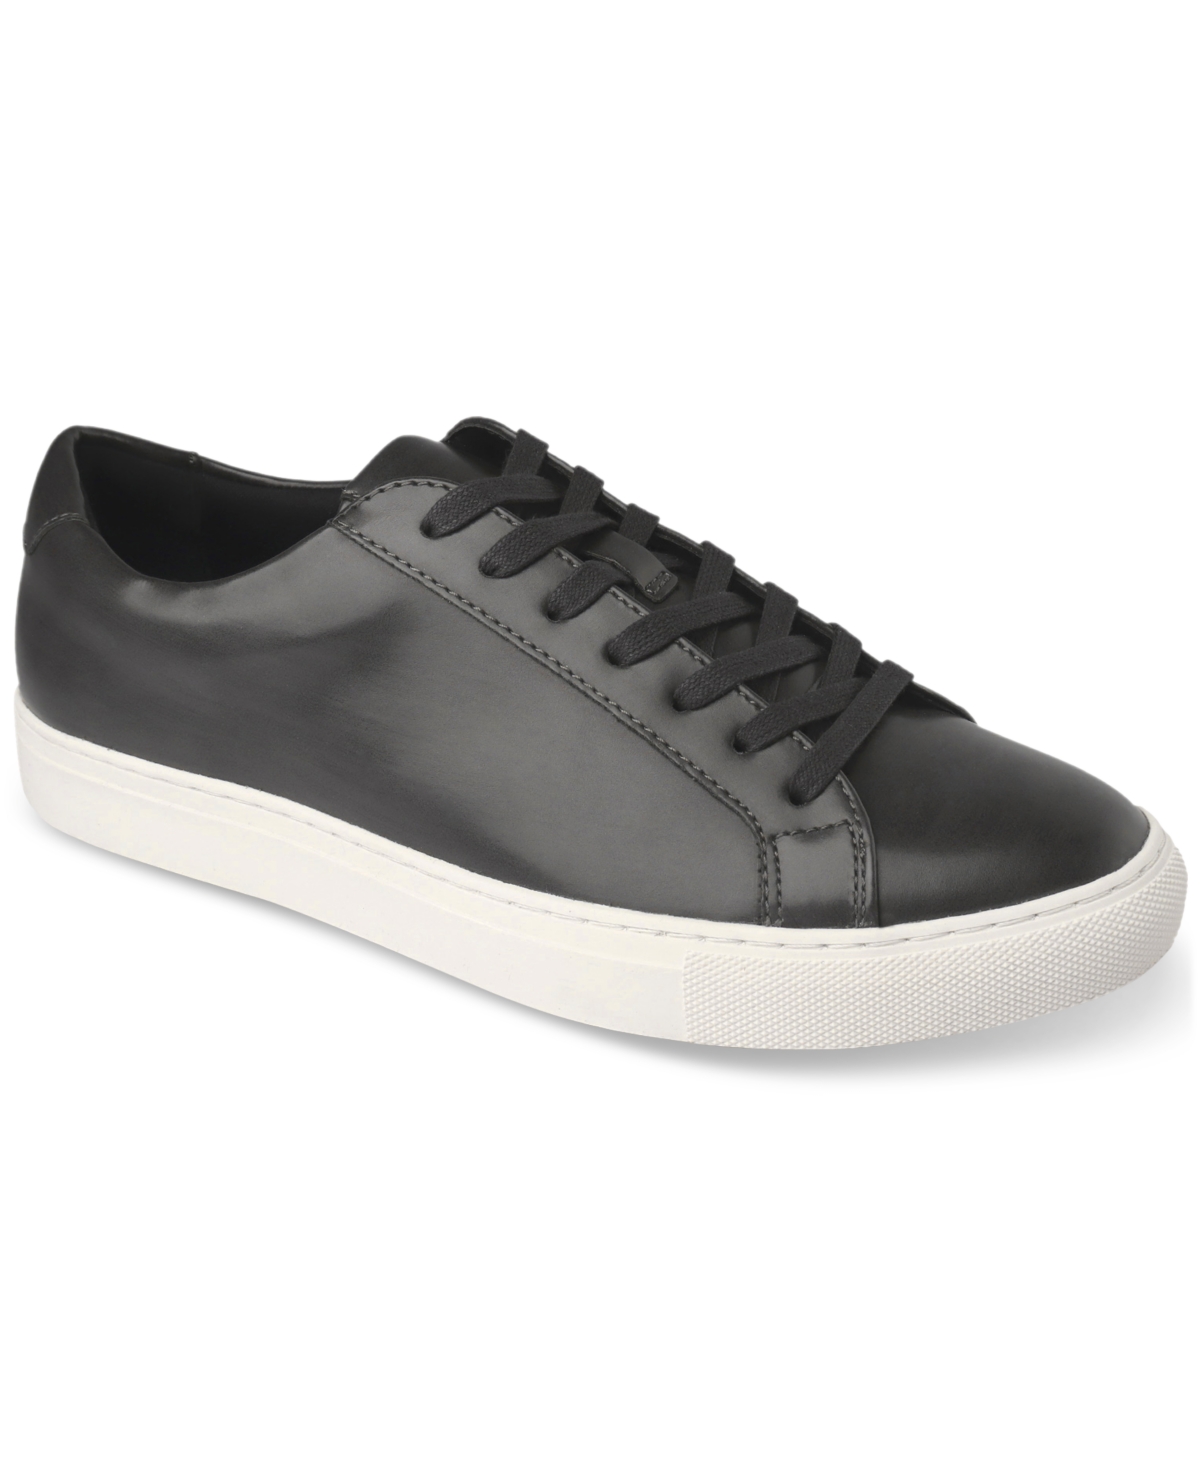 ALFANI MEN'S GRAYSON LACE-UP SNEAKERS, CREATED FOR MACY'S